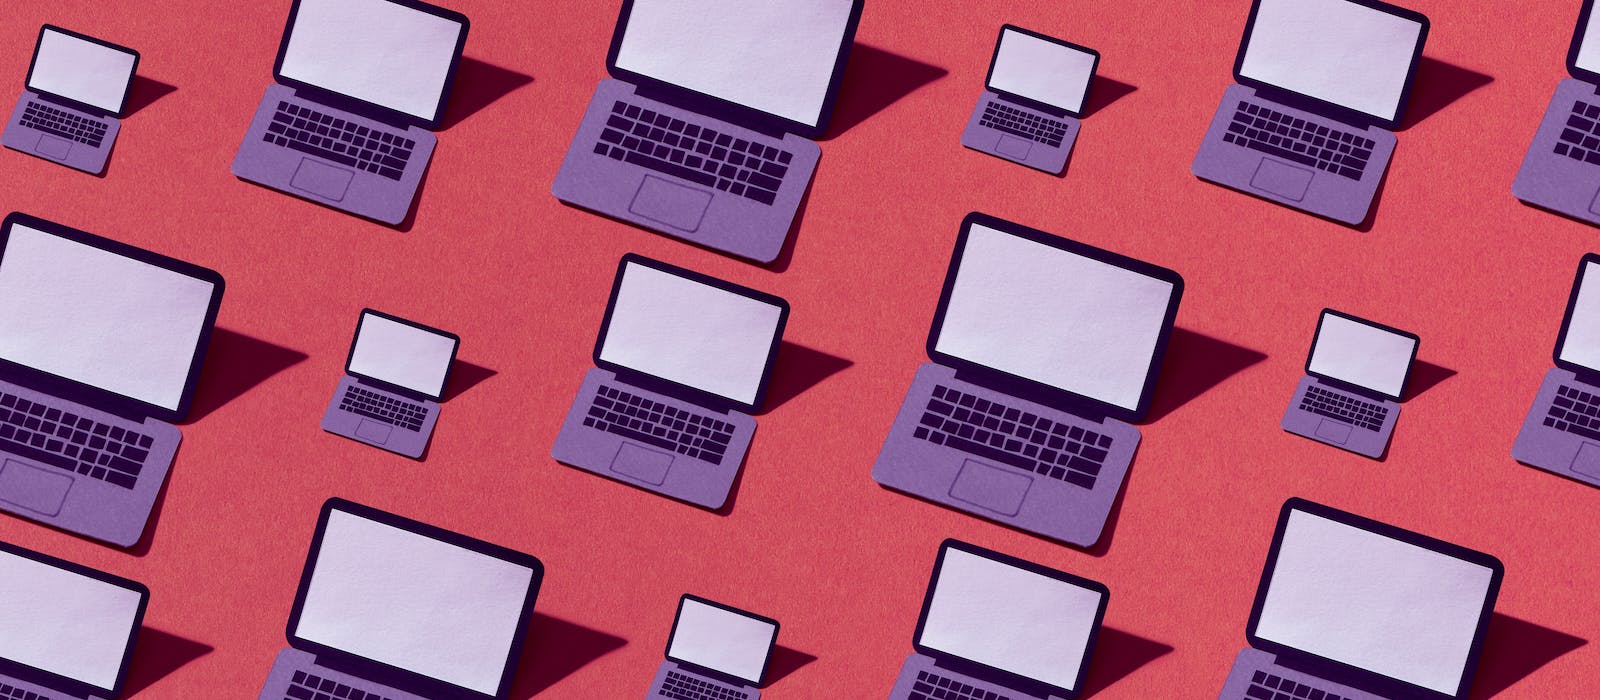 Many drawings of an open, purple laptop with a blank screen on a red background. The laptops are in different sizes and cast shadows to left.